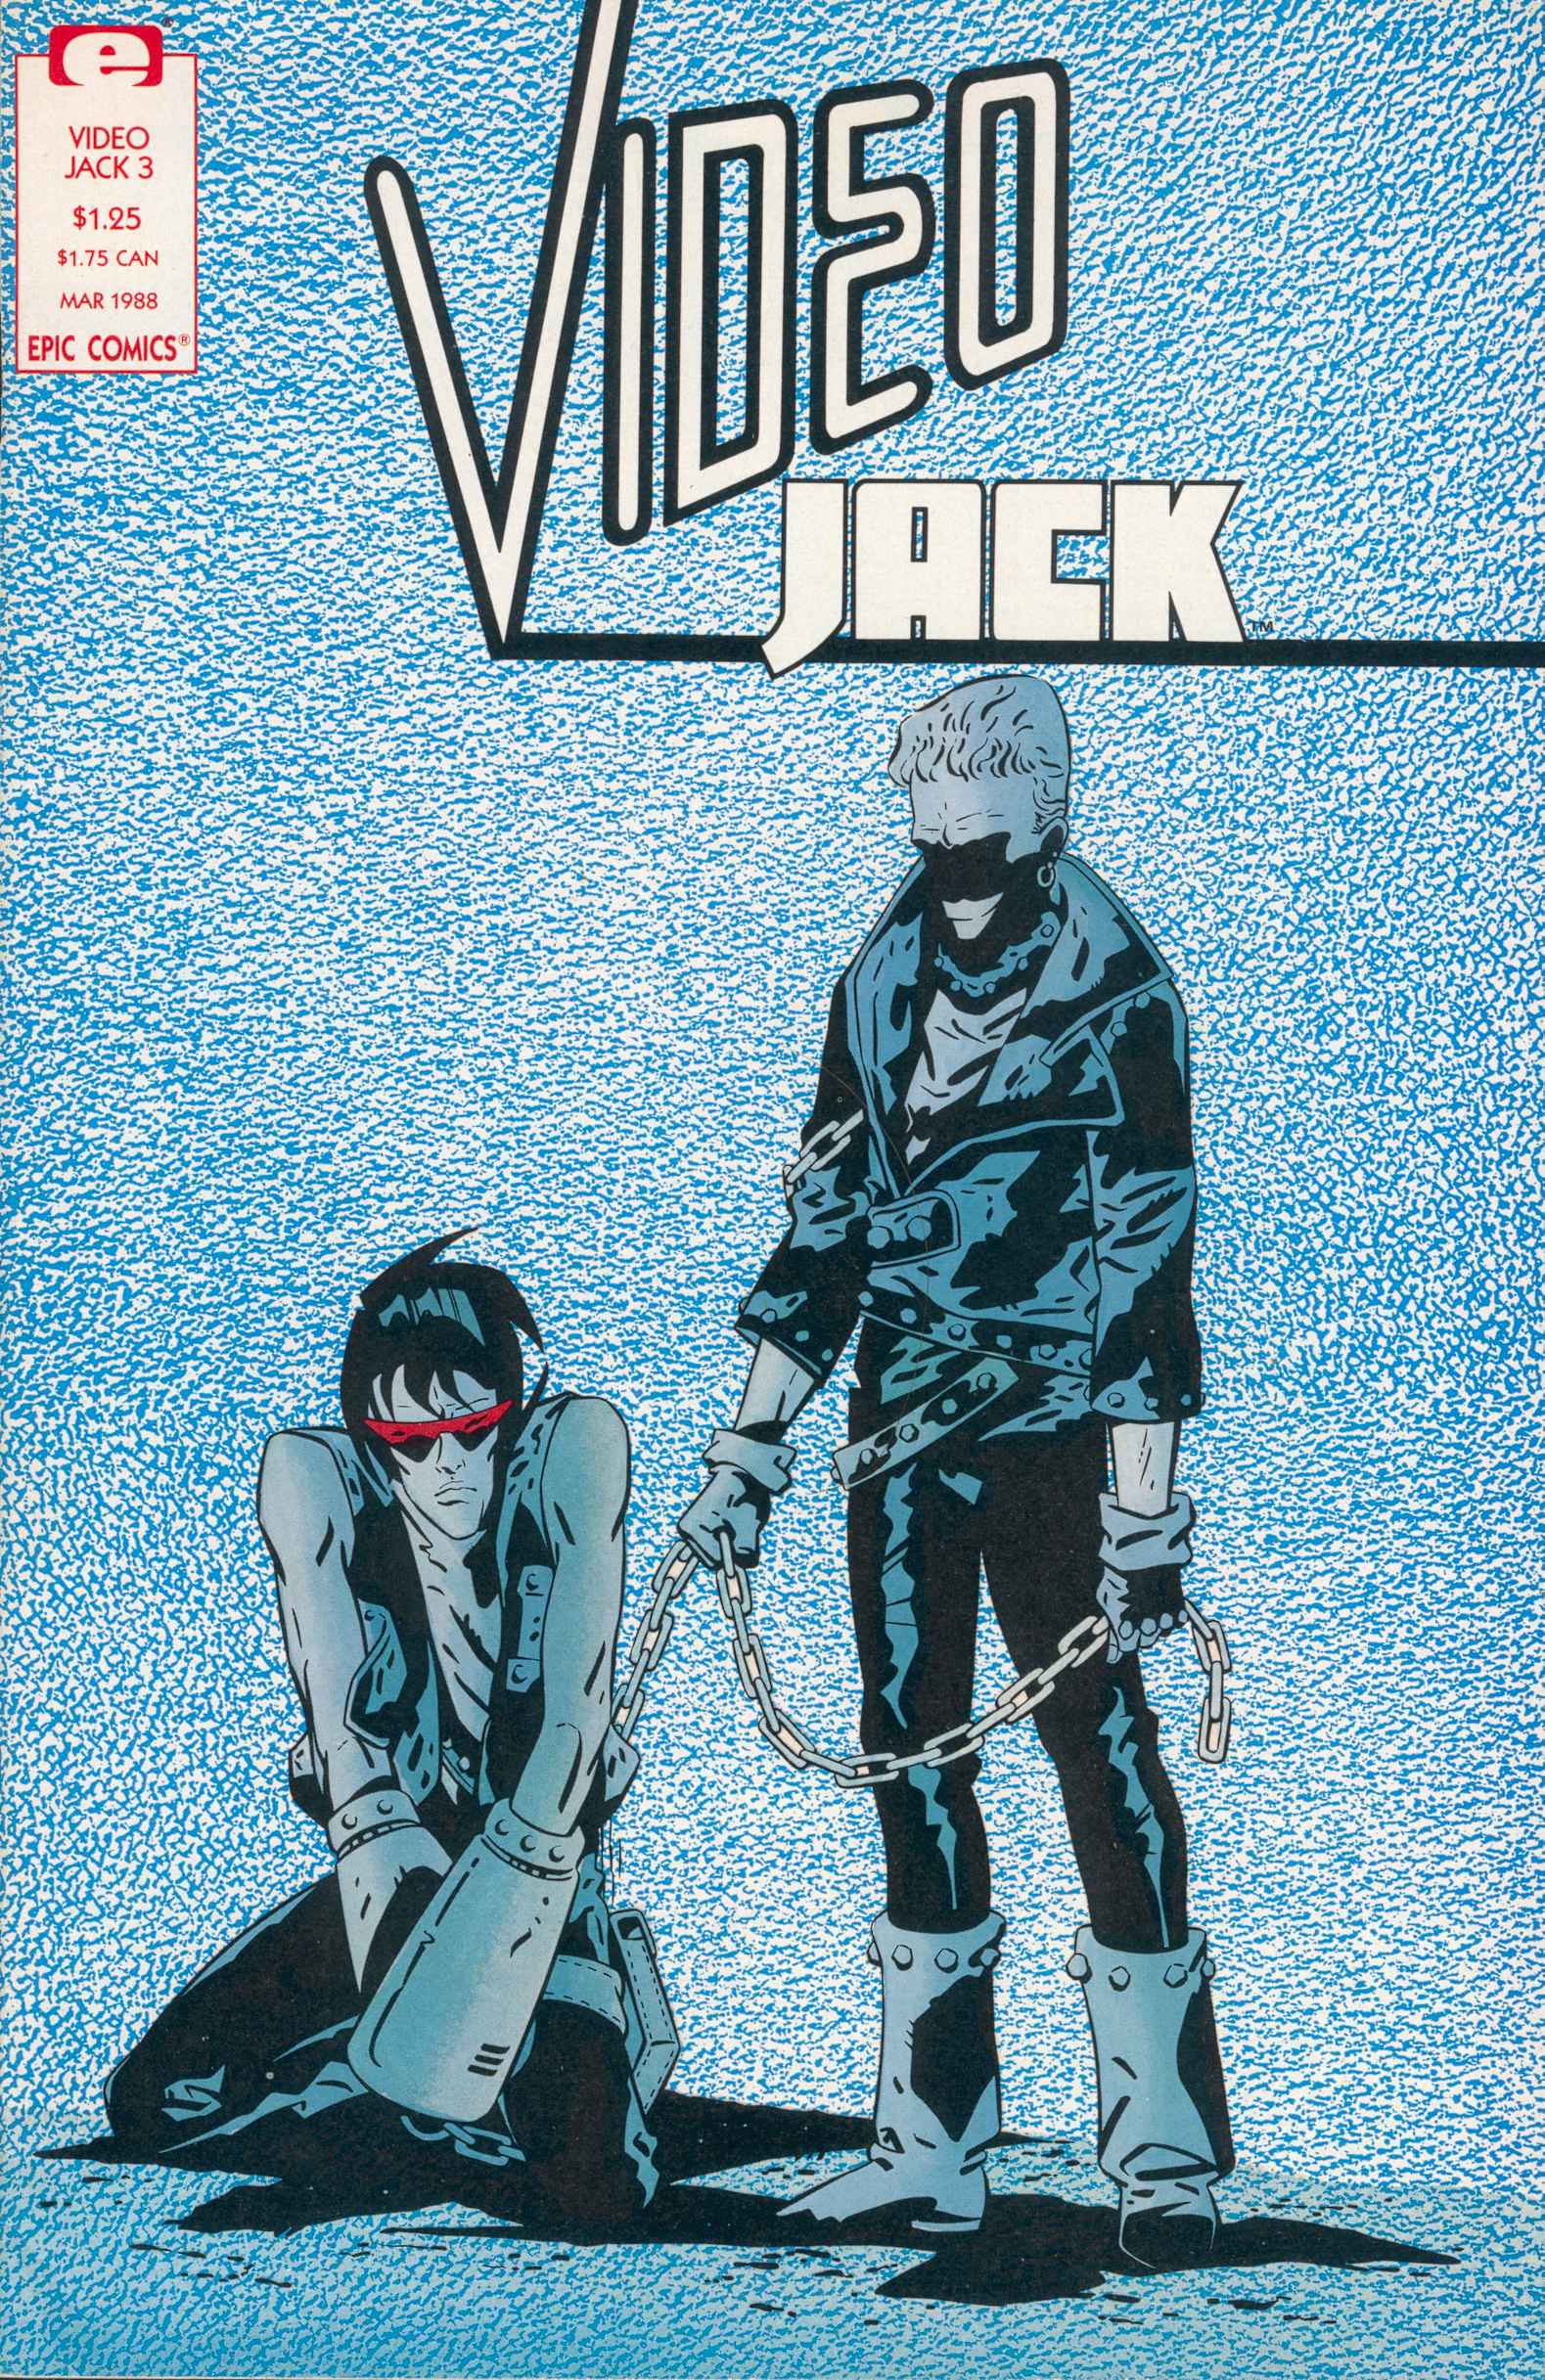 Read online Video Jack comic -  Issue #3 - 1